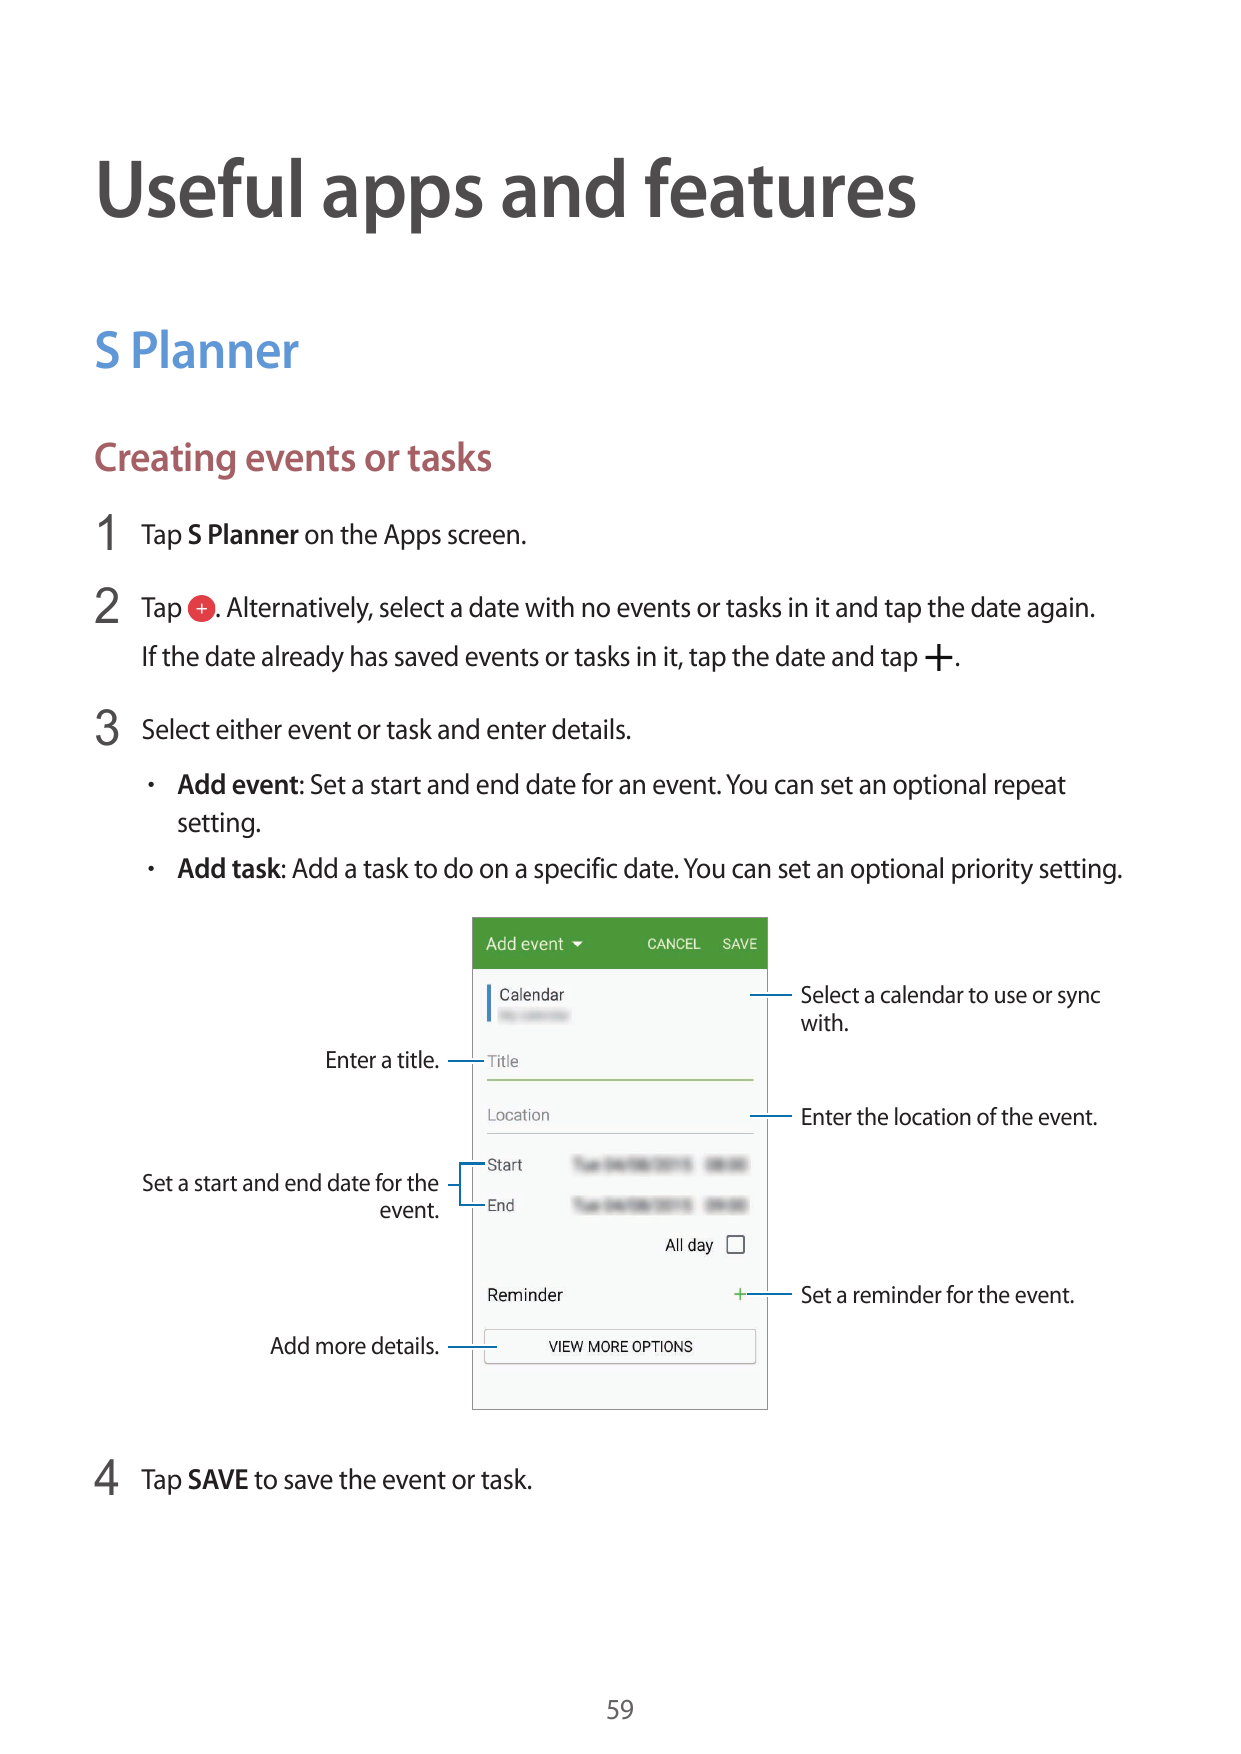 Useful apps and featuresS PlannerCreating events or tasks1 Tap S Planner on the Apps screen.2 Tap . Alternatively, select a date